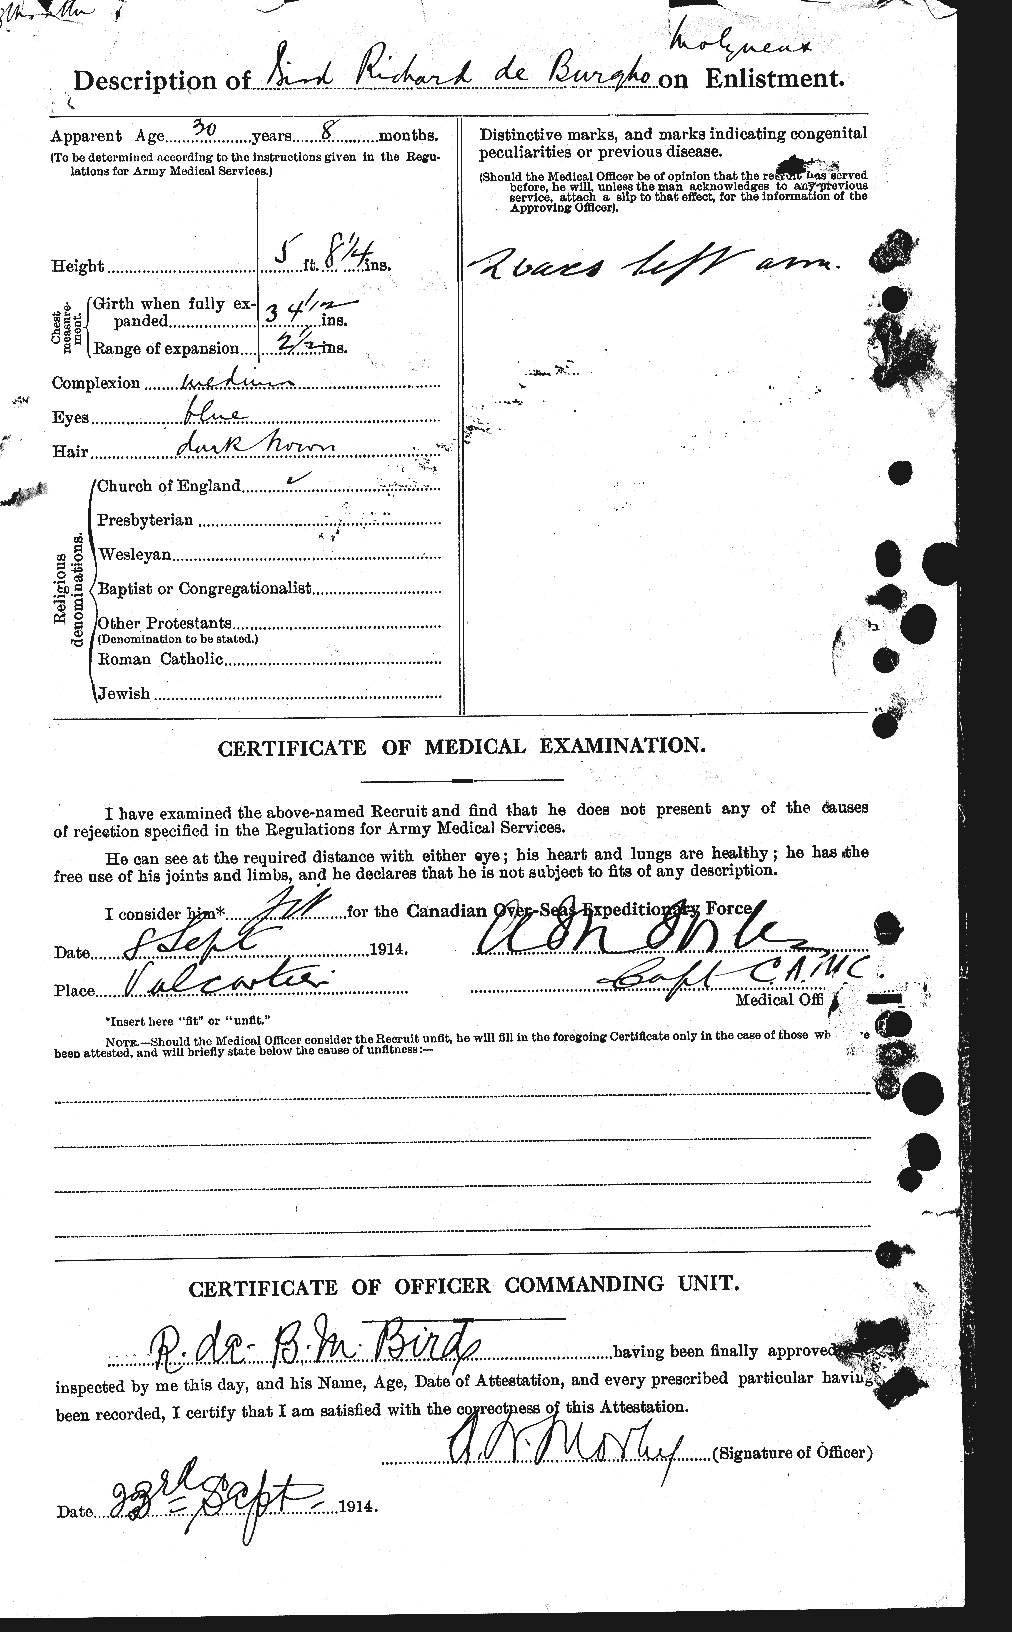 Personnel Records of the First World War - CEF 239496b